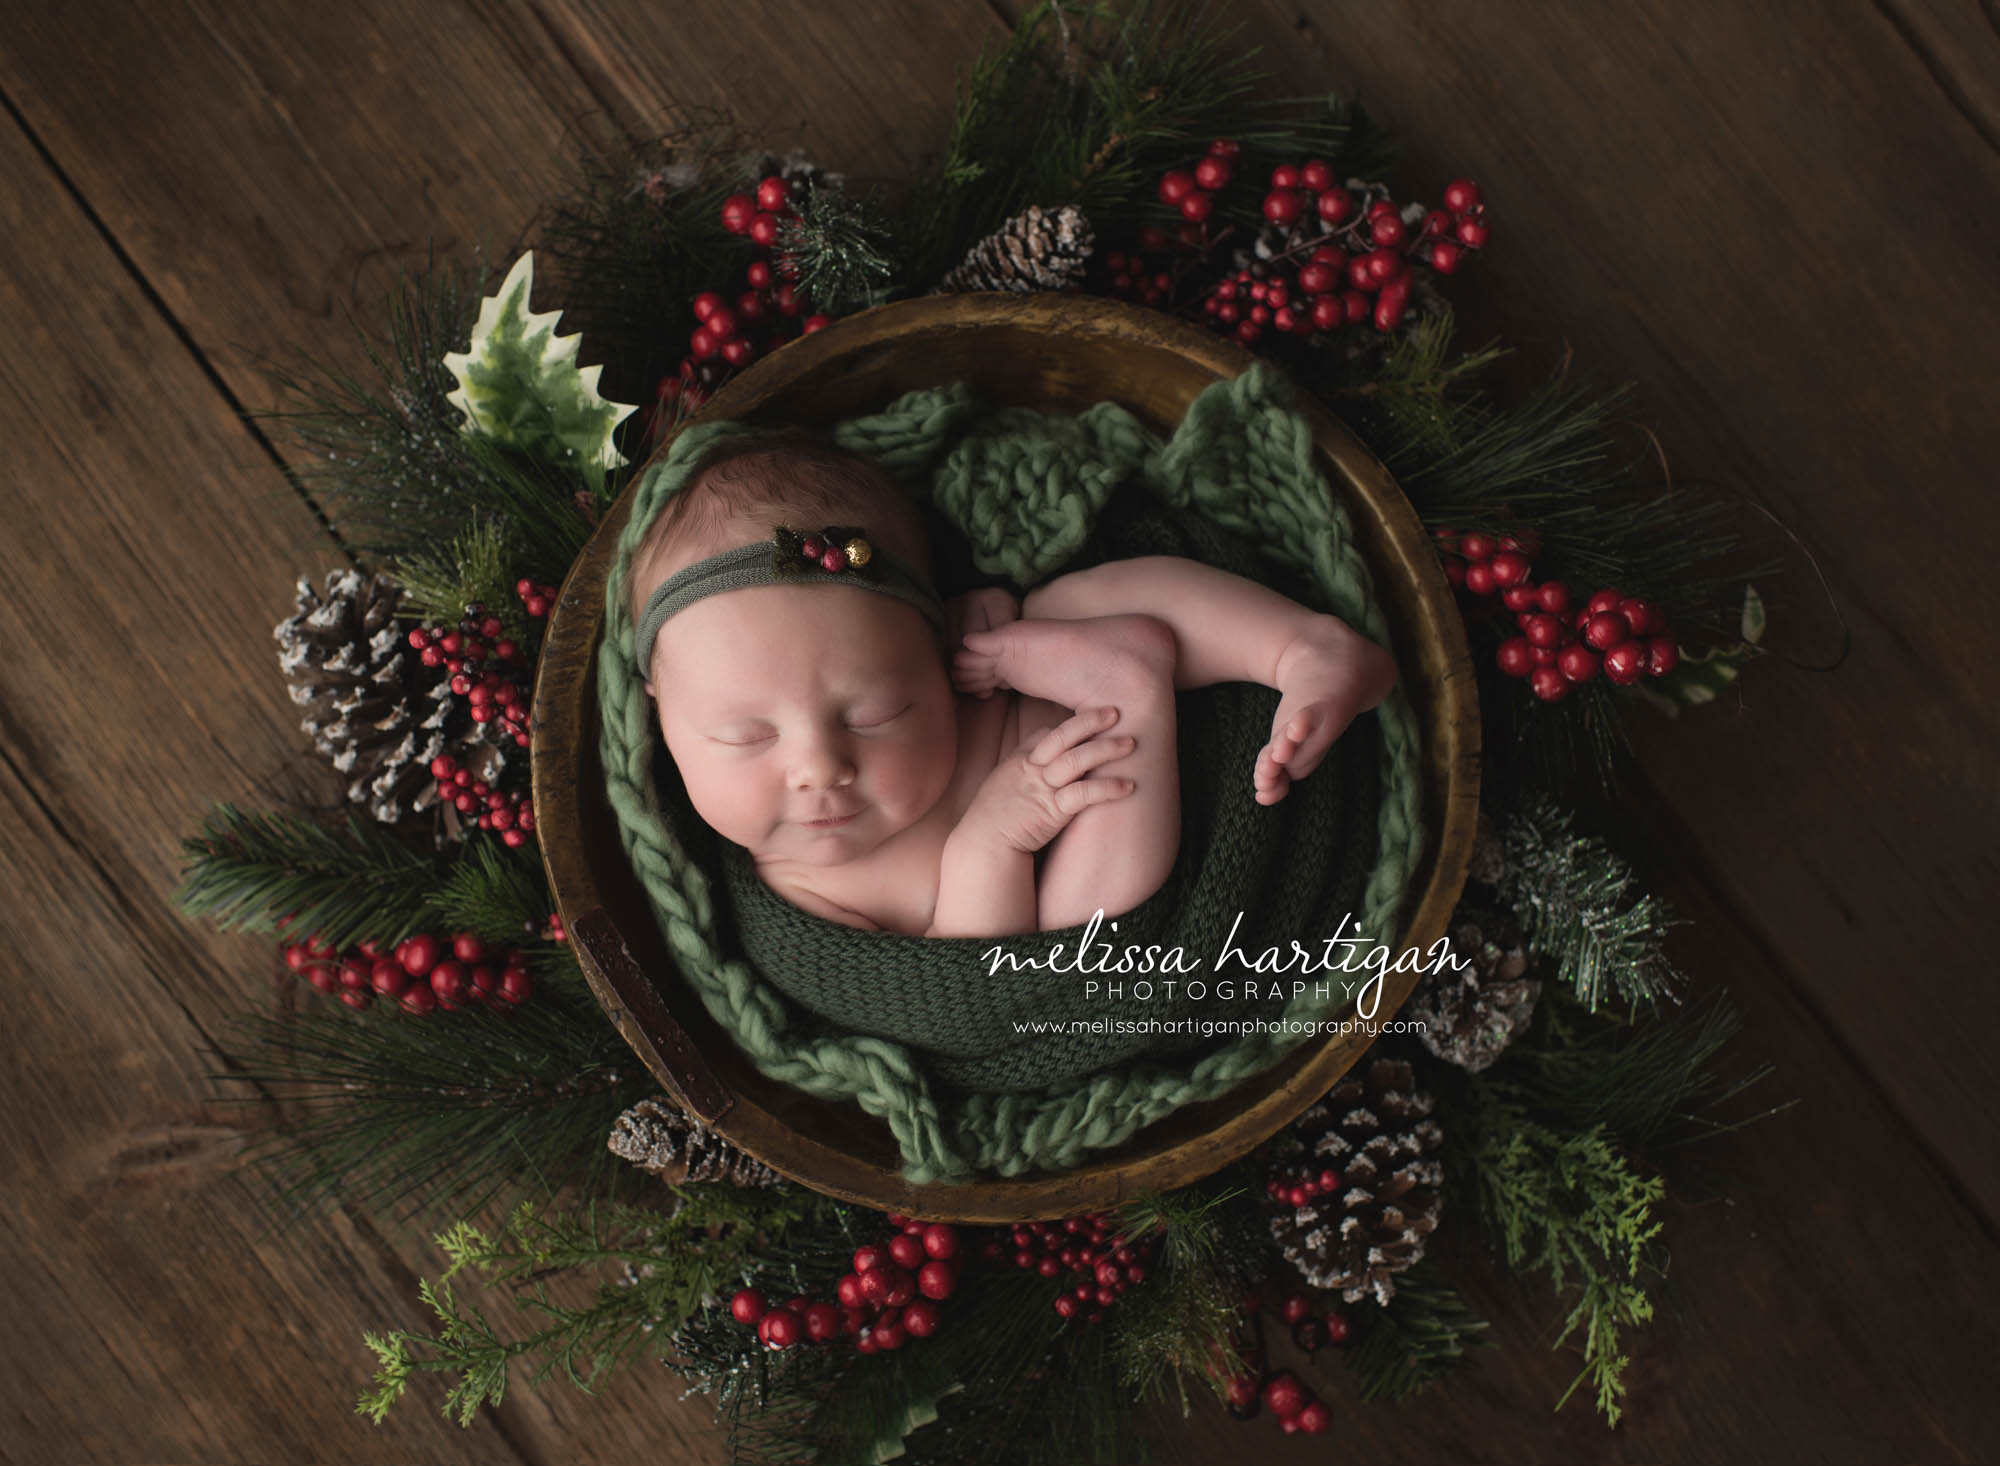 Melissa Hartigan Photography Connecticut Newborn Photographer Coventry Ct Middlefield CT baby Fairfield county Baby girl green headband on green blankets in wooden bowl Christmas wreath sleeping CT newborn session